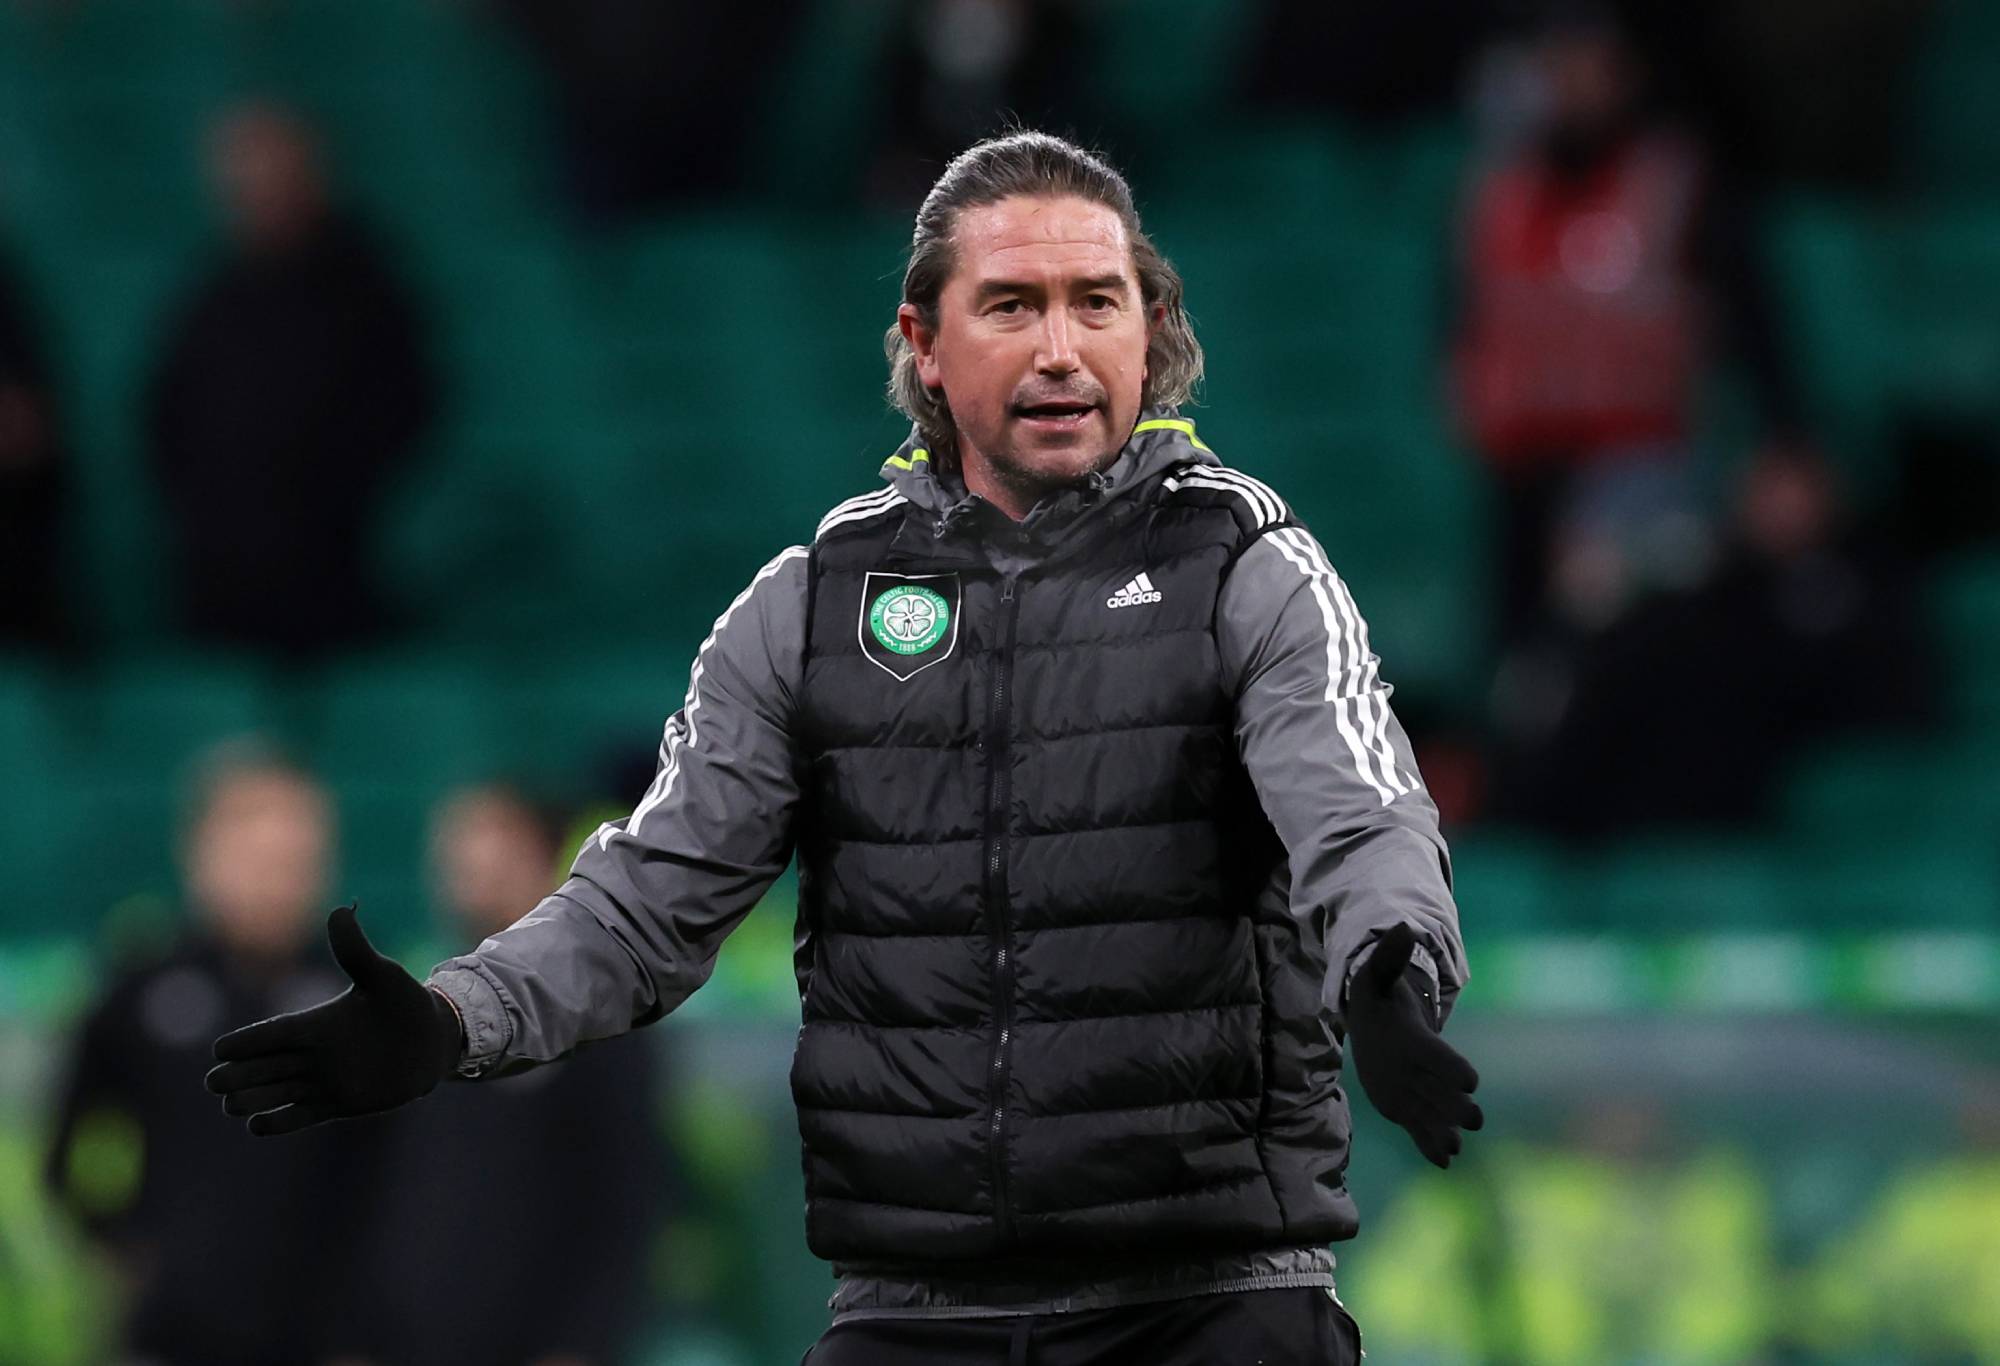 Harry Kewell, First Team Coach of Celtic, gestures prior to the Cinch Scottish Premiership match between Celtic FC and Heart of Midlothian at Celtic Park on March 08, 2023 in Glasgow, Scotland. (Photo by Ian MacNicol/Getty Images)